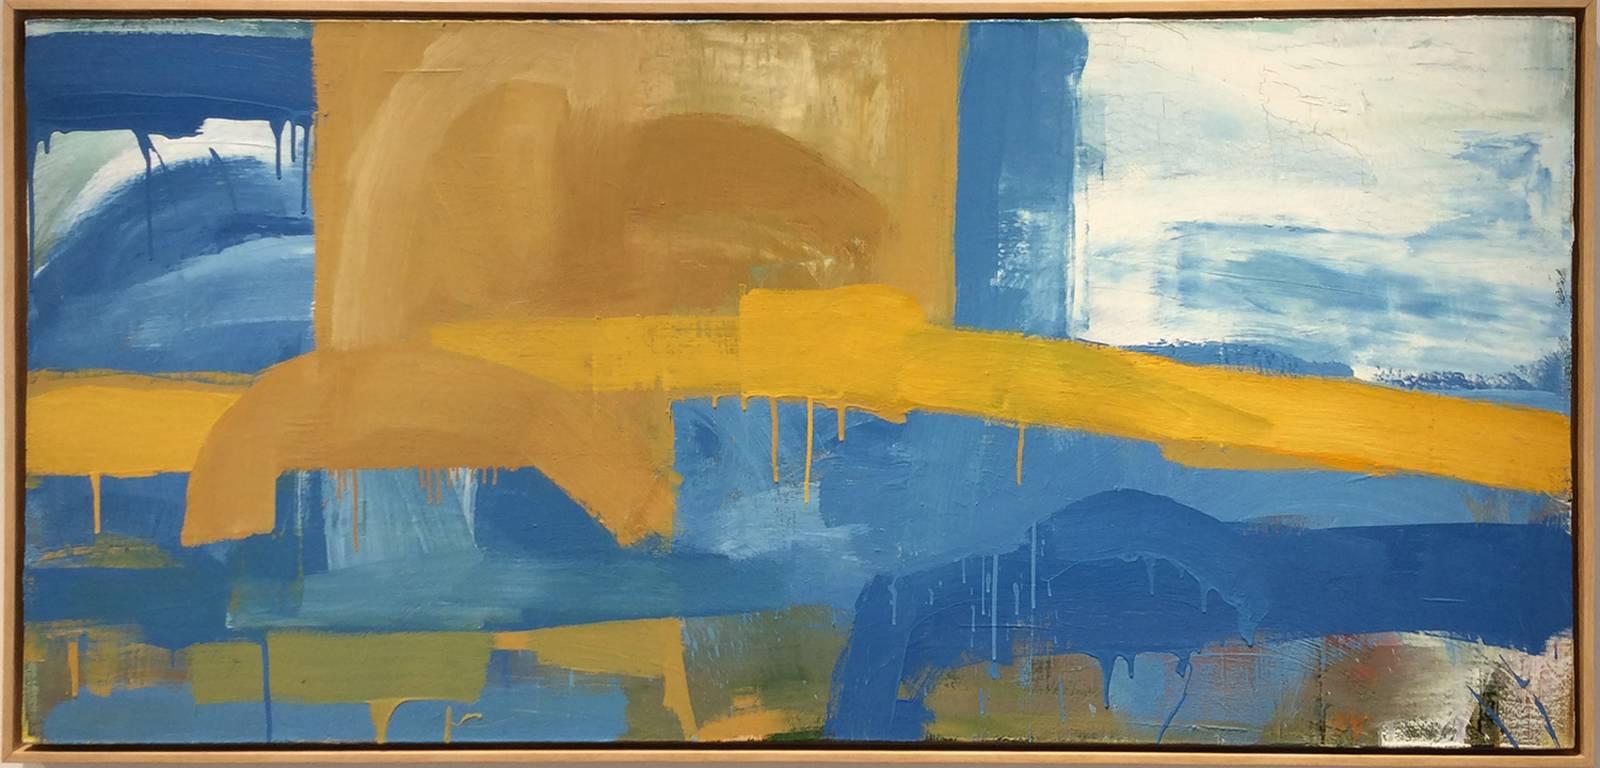 Canyon (Abstracted Landscape Painting, Oil on Canvas in Sky Blue & Yellow) - Brown Abstract Painting by Christopher Engel